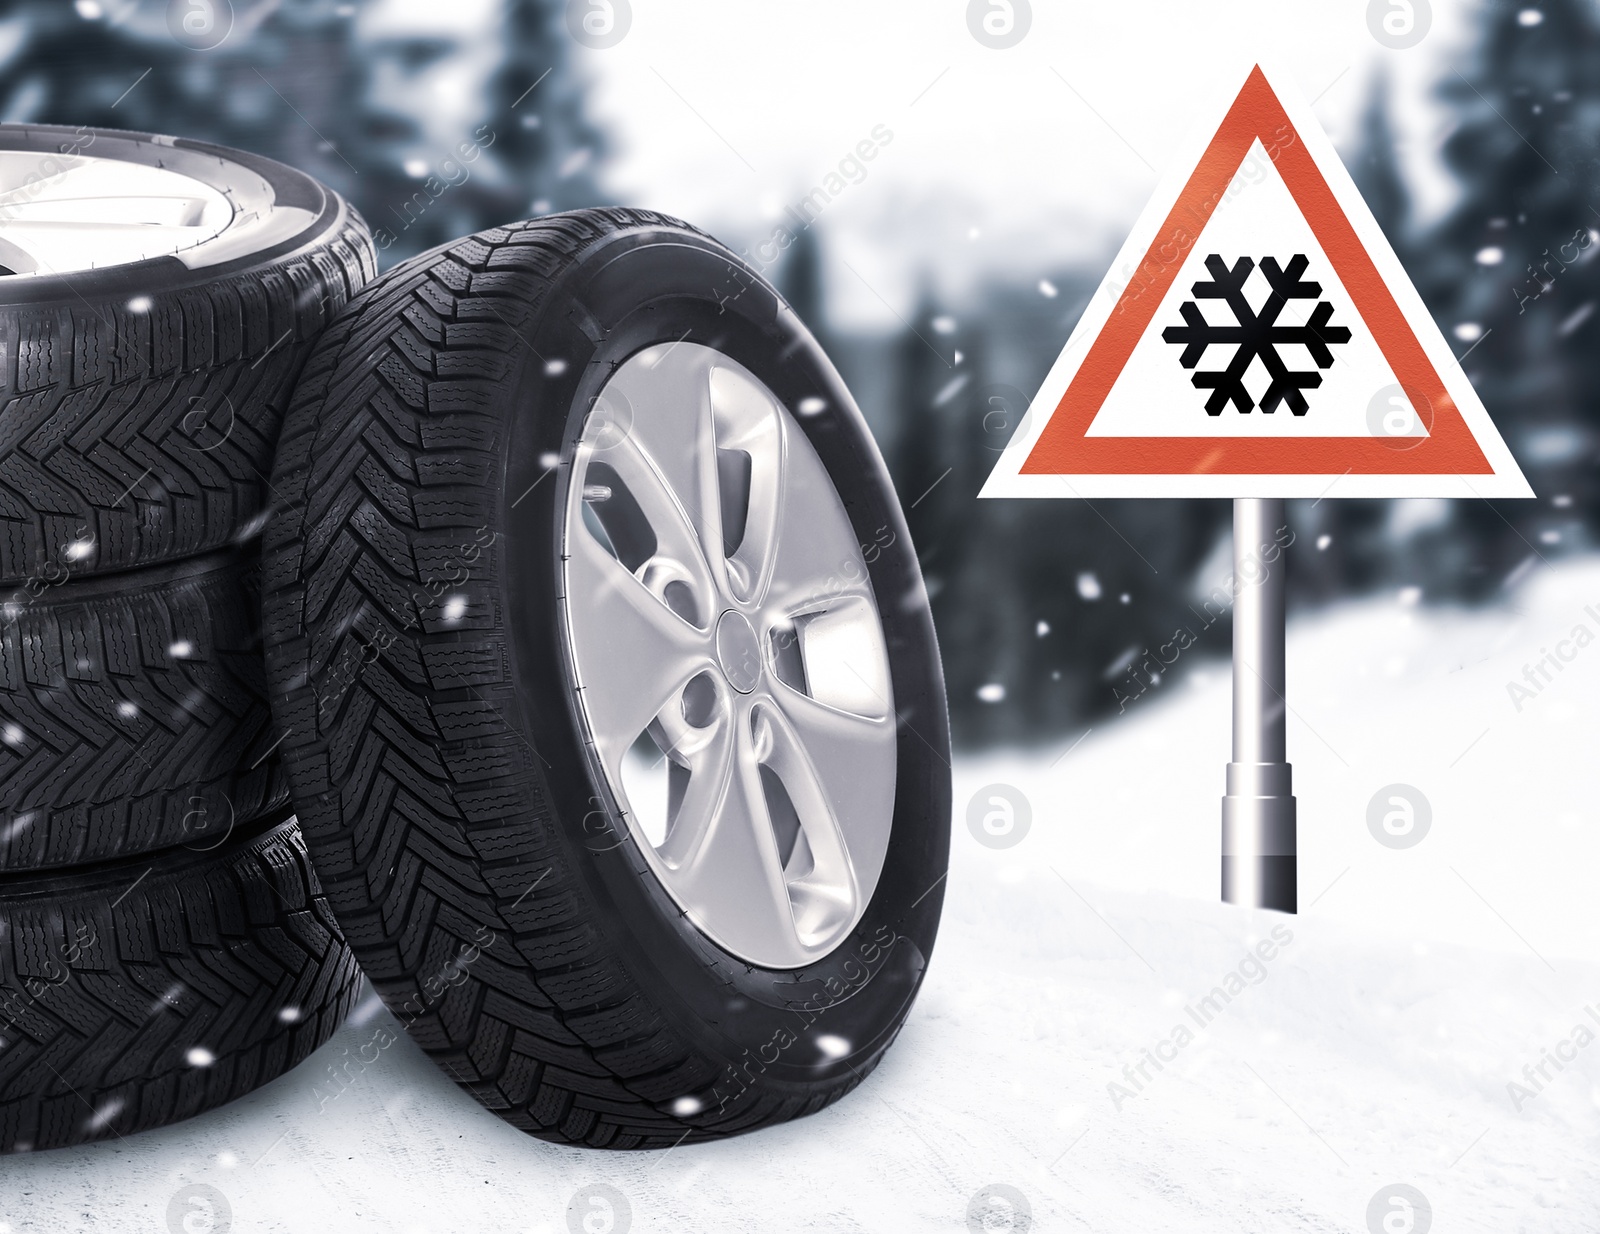 Image of Set of wheels with winter tires on snow and road sign outdoors